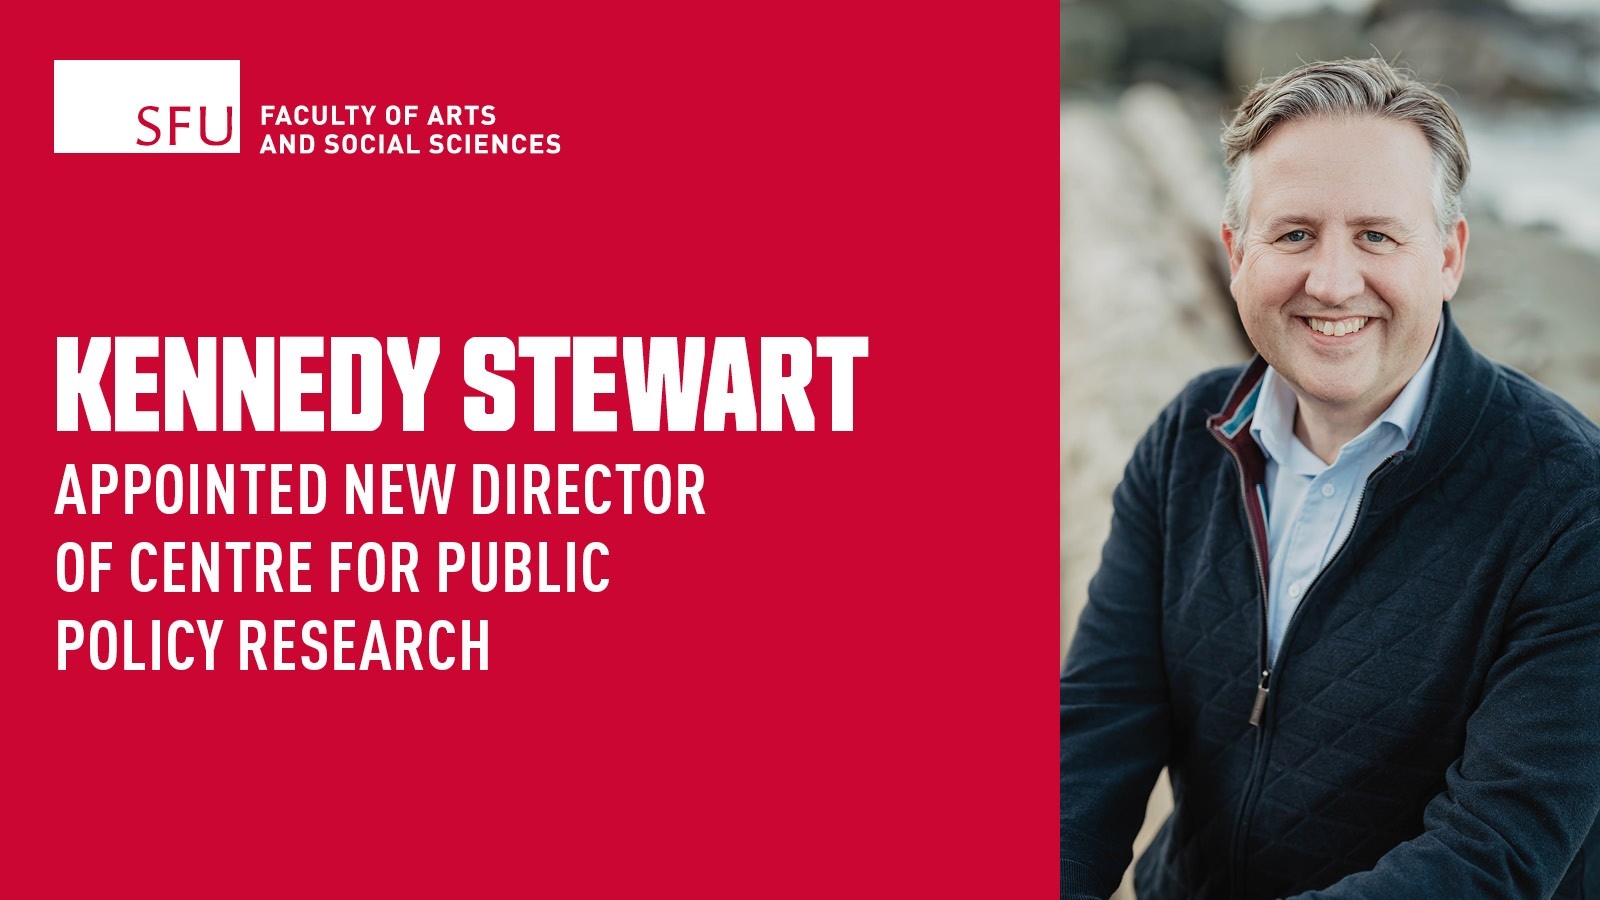 On the left side, is a red box that takes up two thirds of the graphic with overlaying white text which reads: KENNEDY STEWART APPOINTED NEW DIRECTOR OF CENTRE FOR PUBLIC POLICY. Above the text is a white box with red text that reads SFU. To its right is white text that reads: FACULTY OF ARTS AND SOCIAL SCIENCES. On the right side of the graphic, Kennedy Stewart is sitting on a log on a beach, the background is blurred. He has gray hair and is smiling towards the camera. Kennedy is wearing a blue zip up coat with a blue button down shirt underneath.